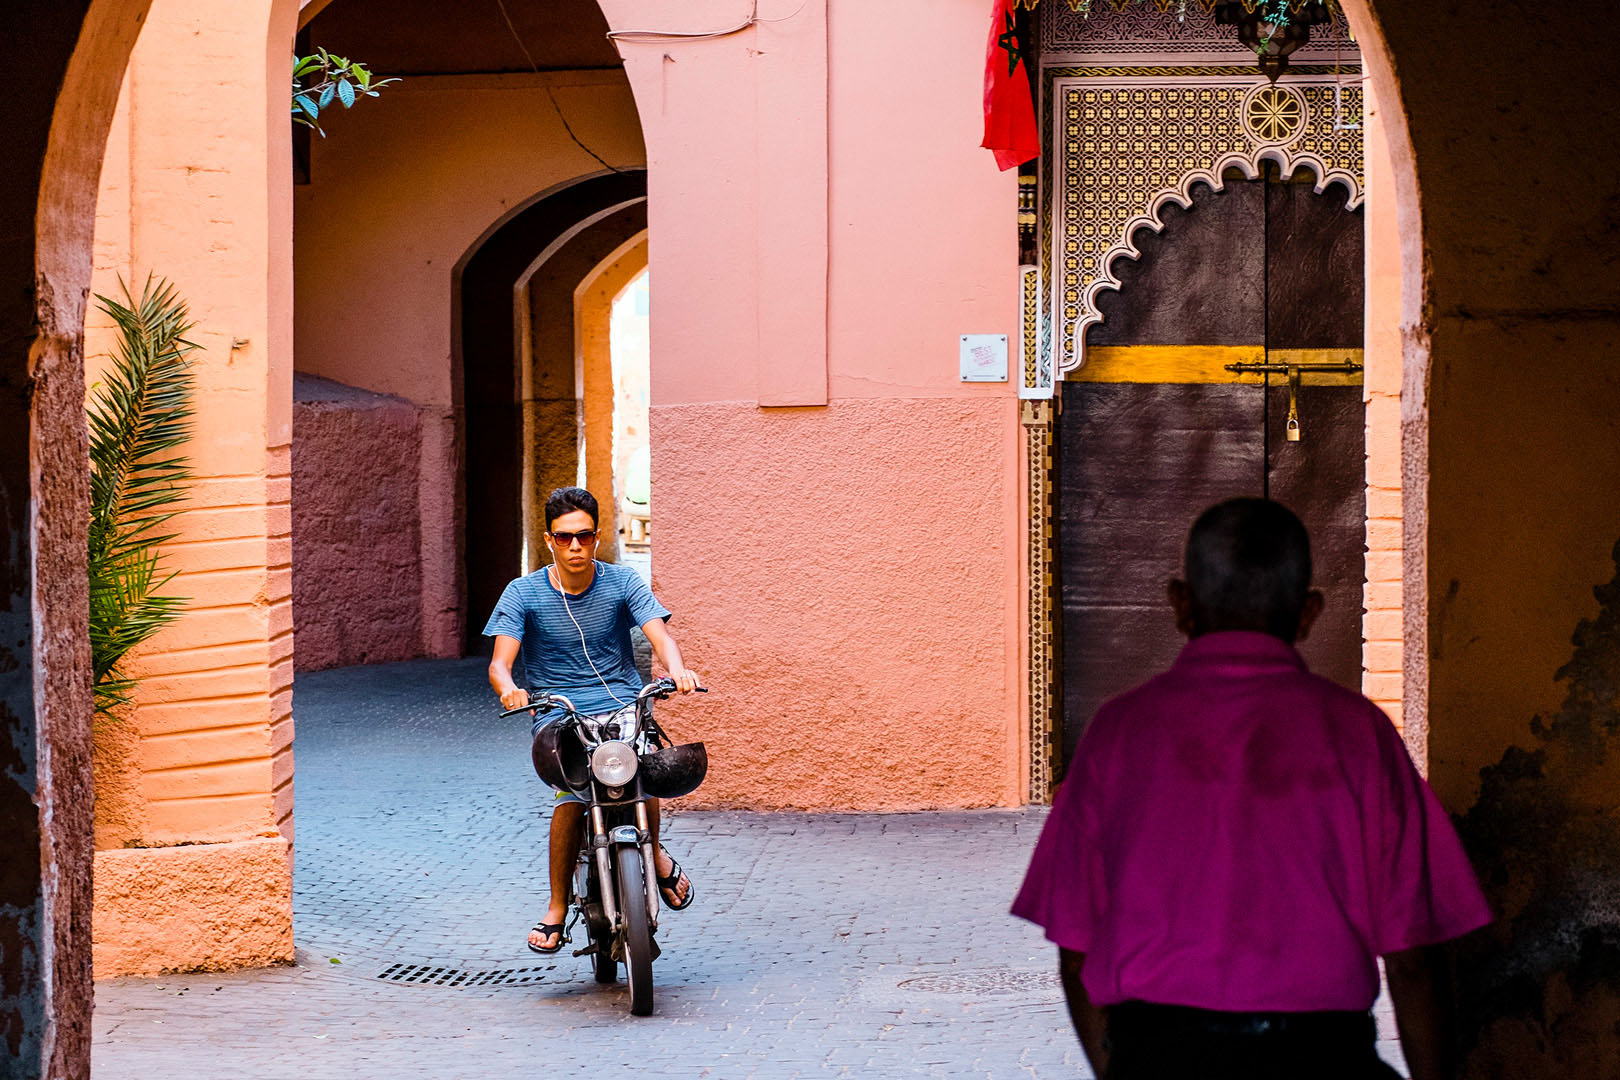 Man on scooter in colourful Marrakech sidestreet going under archway